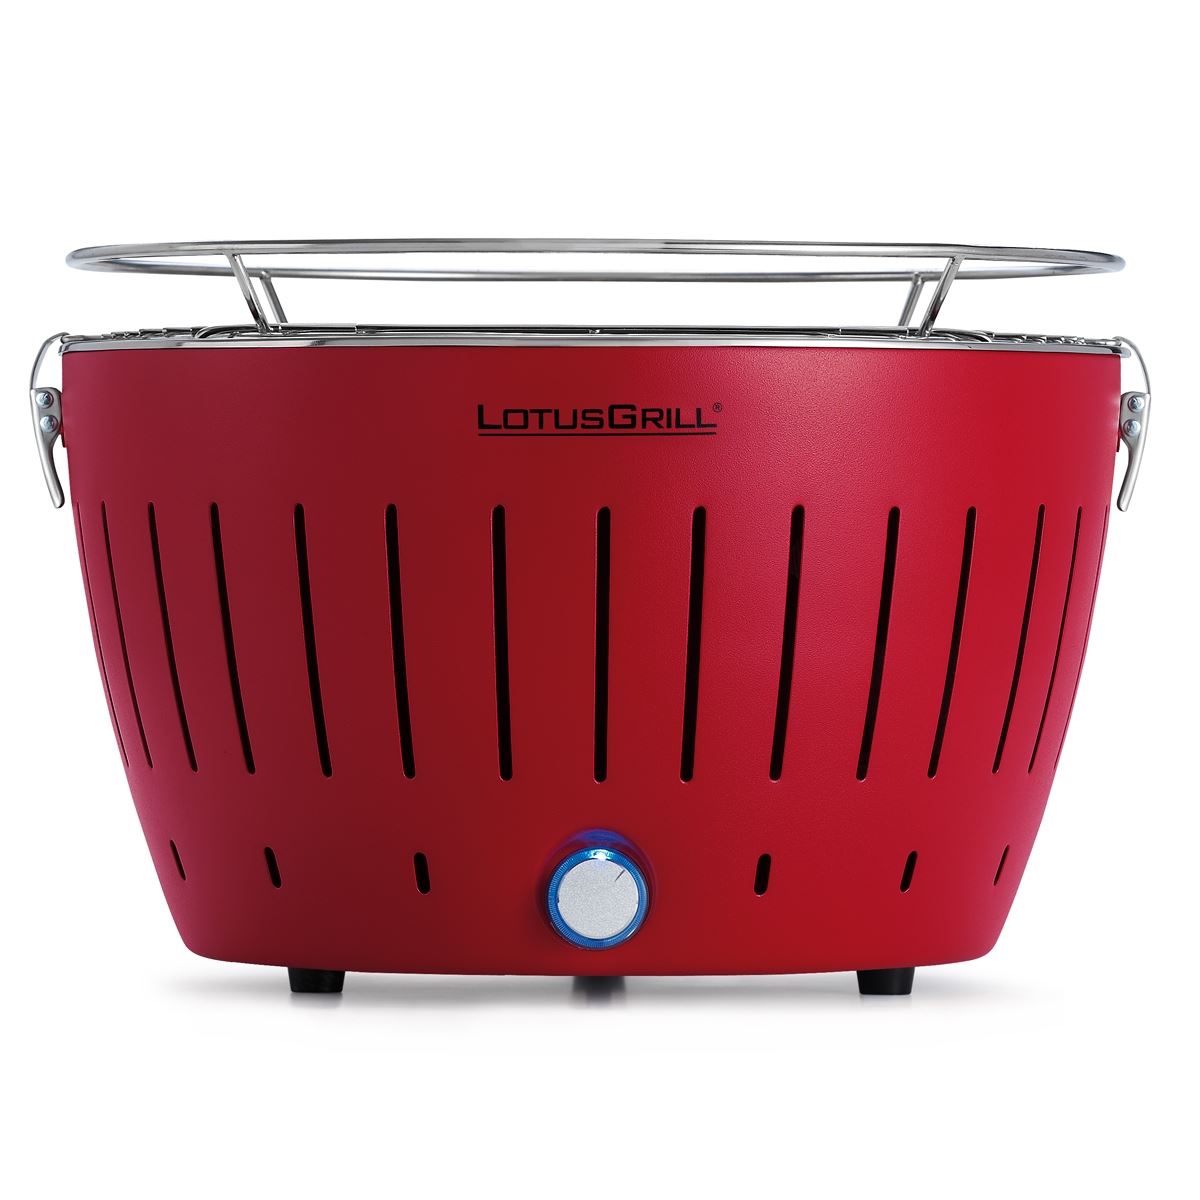 What kind of battery does the LotusGrill use?